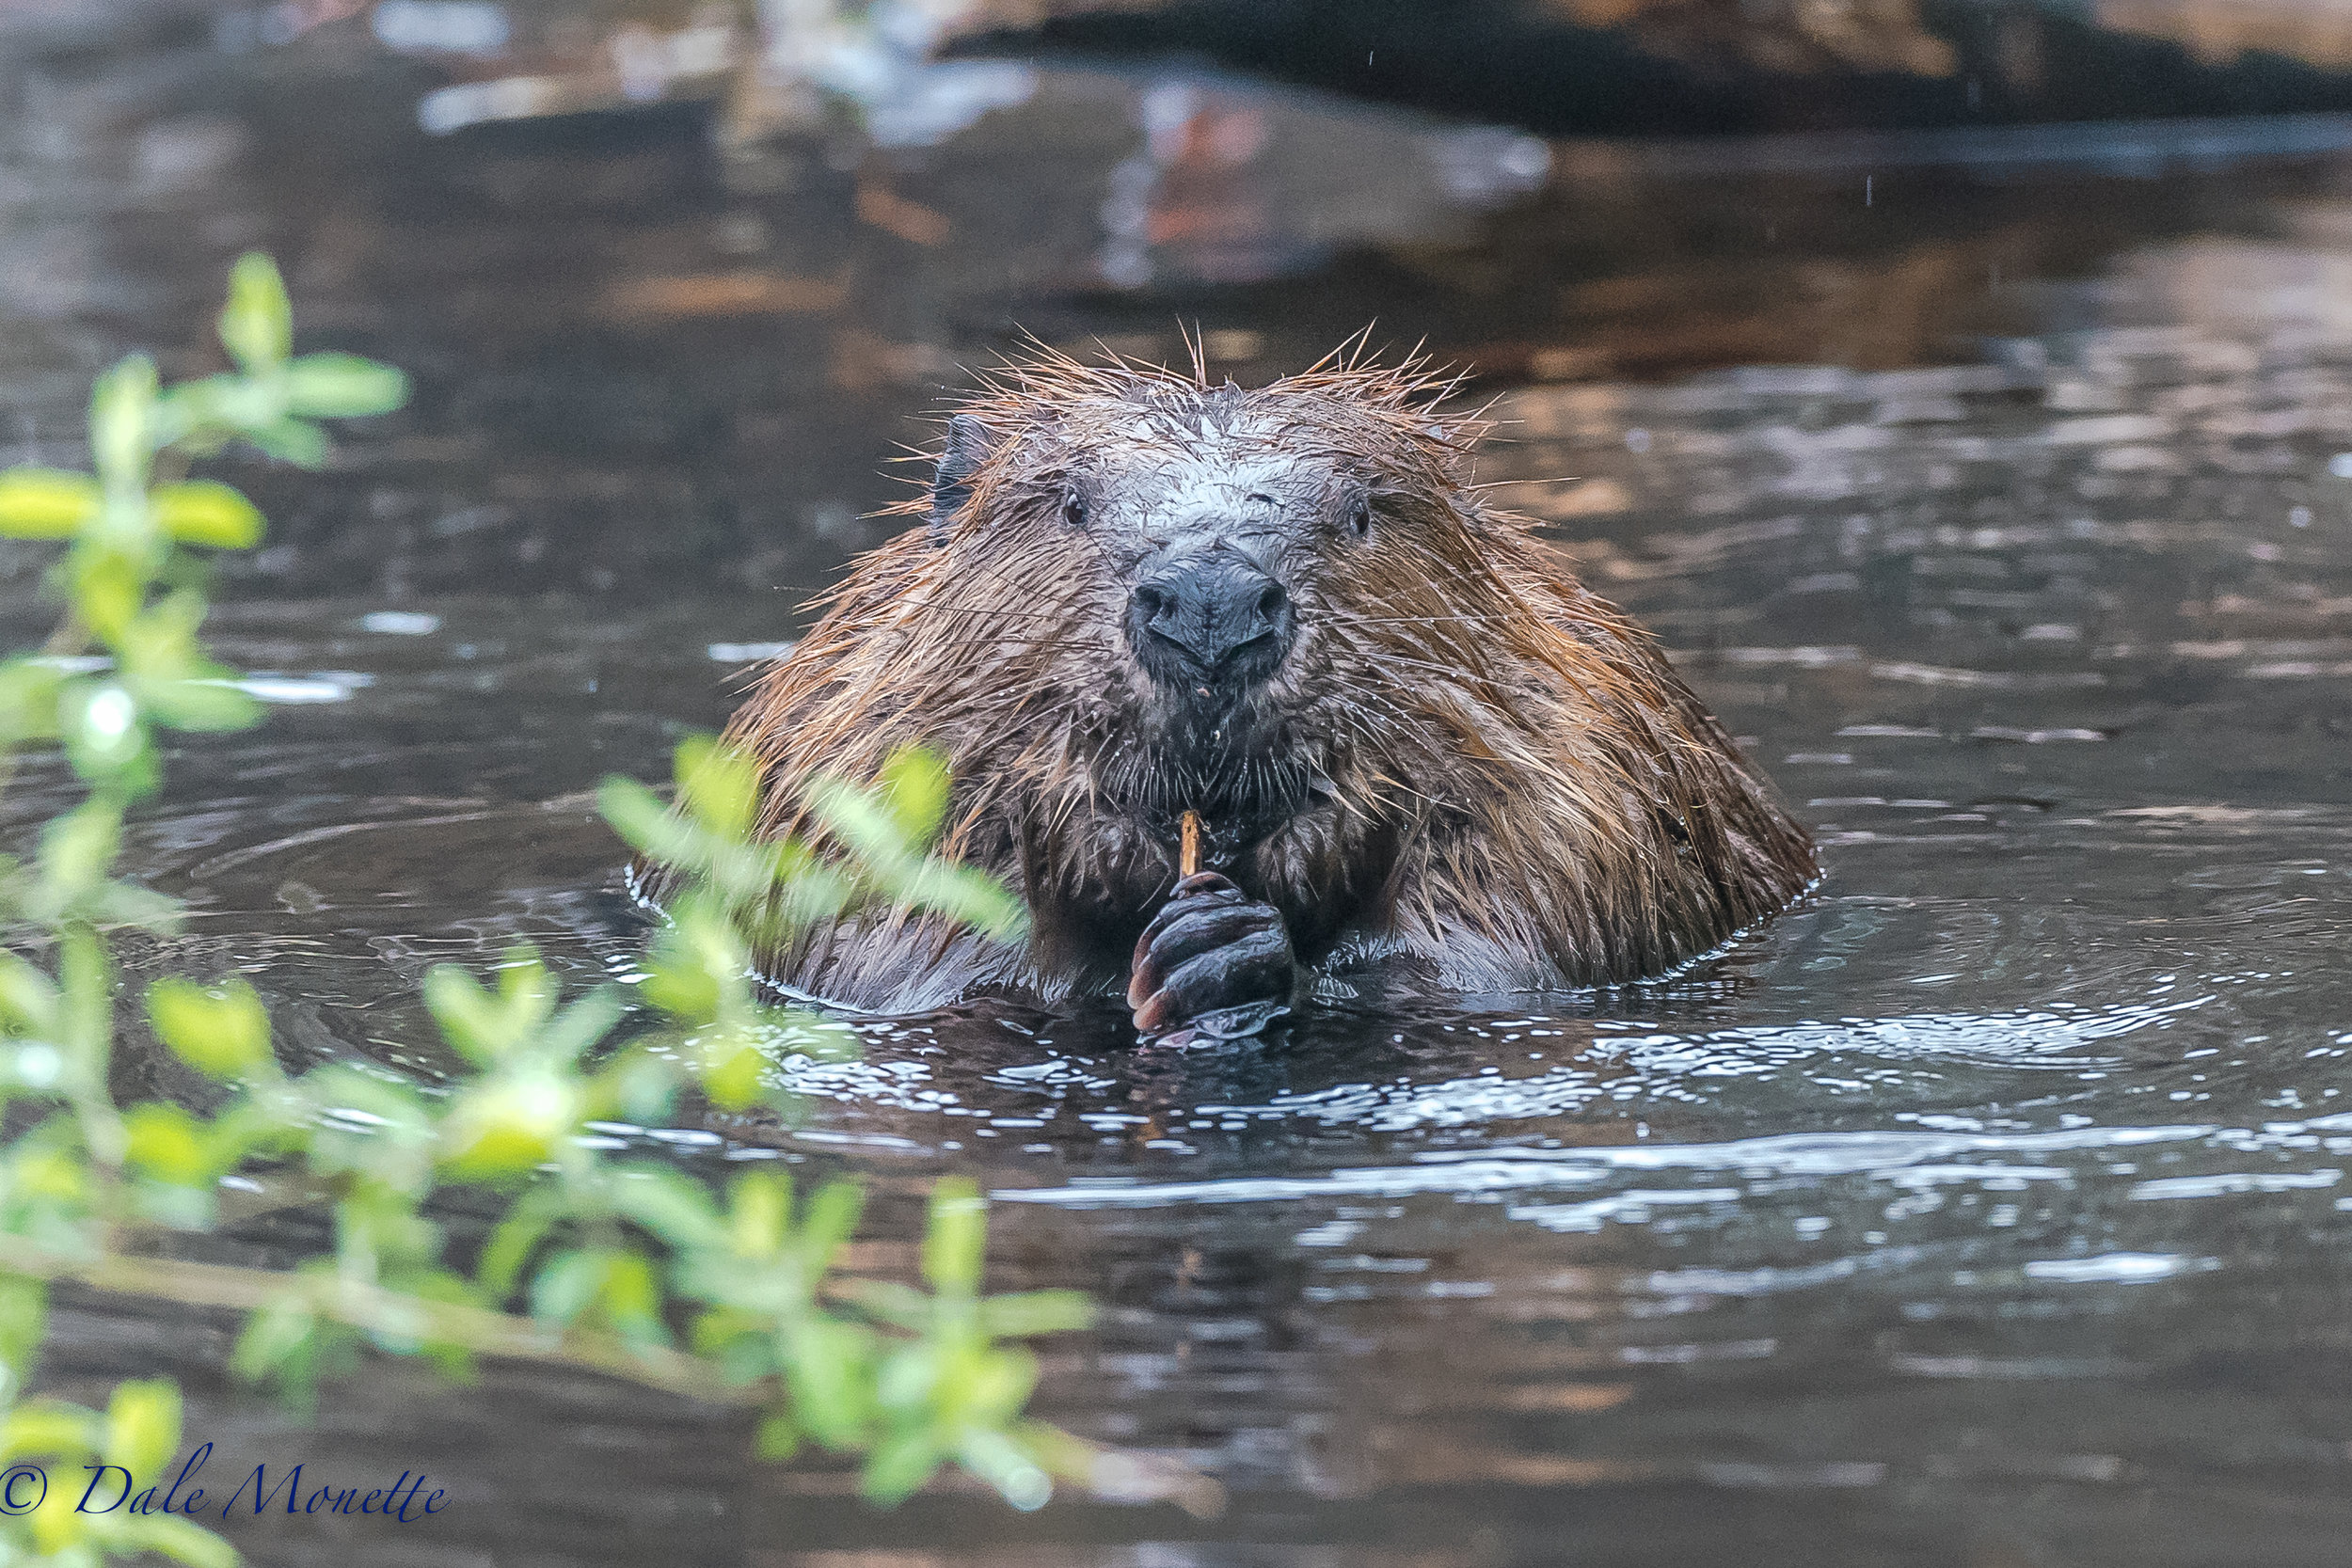   On Saturday morning, the 6th of May we had over an inch of rain over night so I decided to see what the beavers were doing. &nbsp;This guy was eating between working while another pair worked patching up the dam.... what a face huh ?&nbsp;  